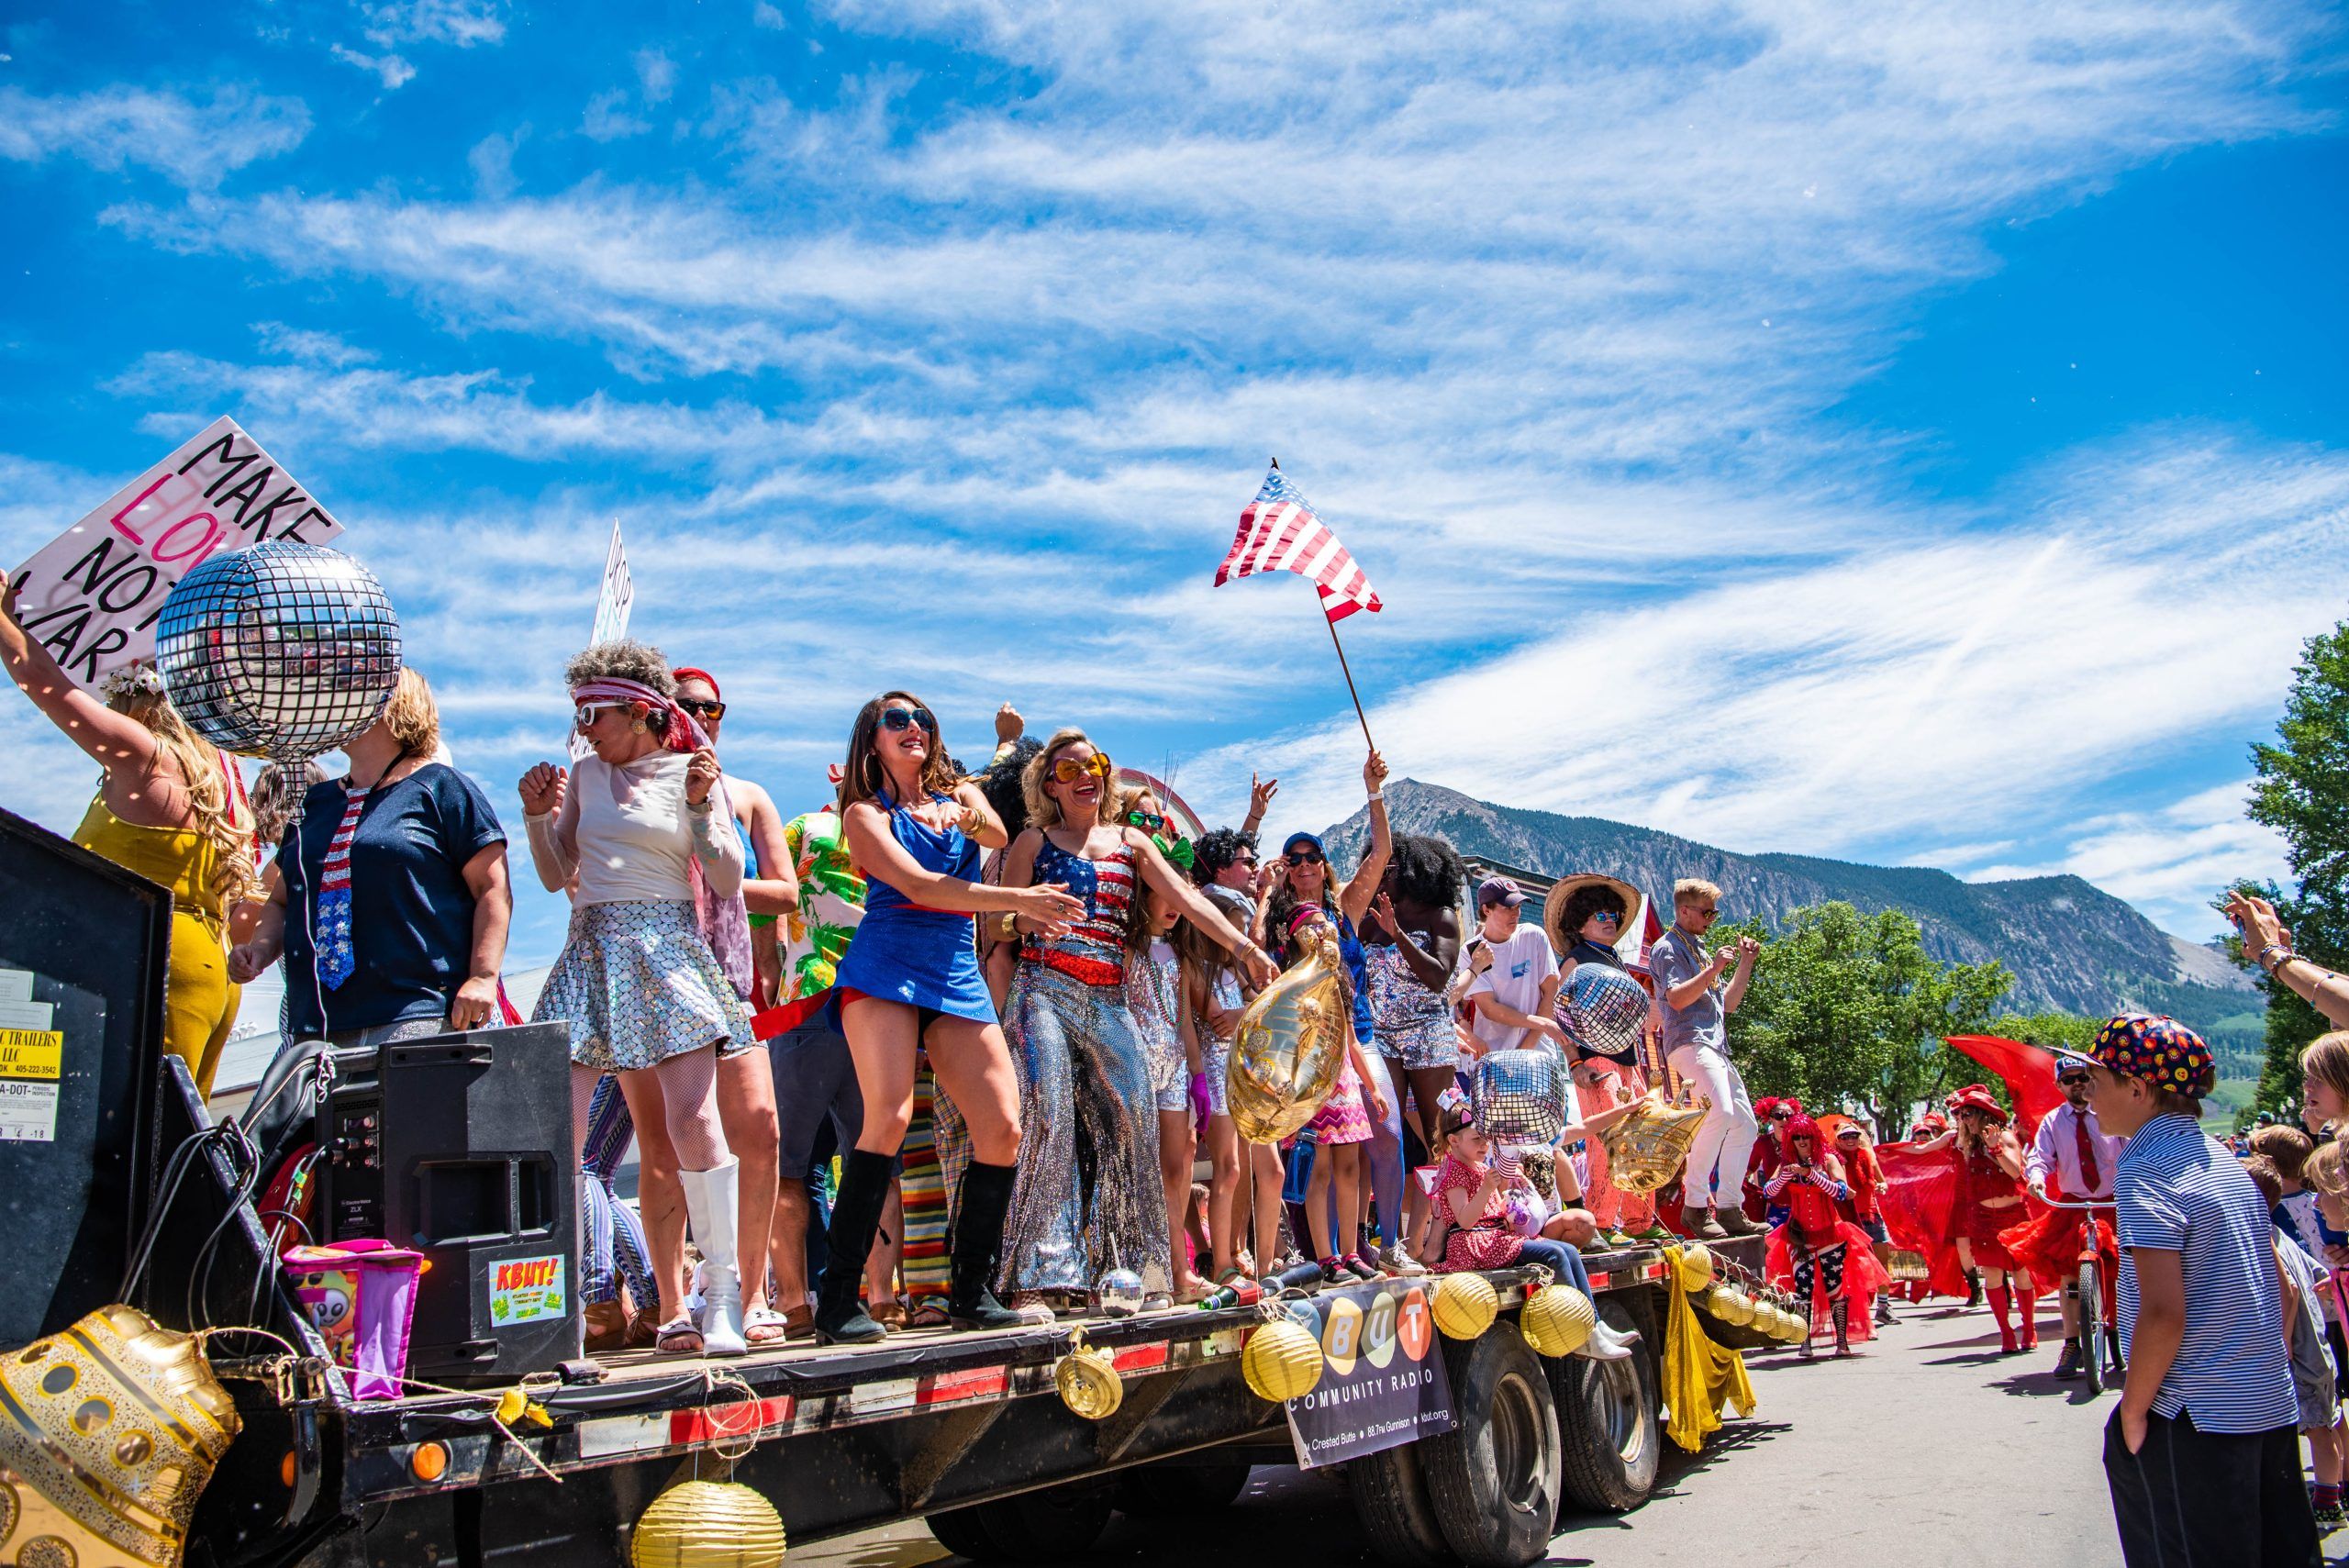 A float on the Fourth of July parade in Crested Butte, Colorado